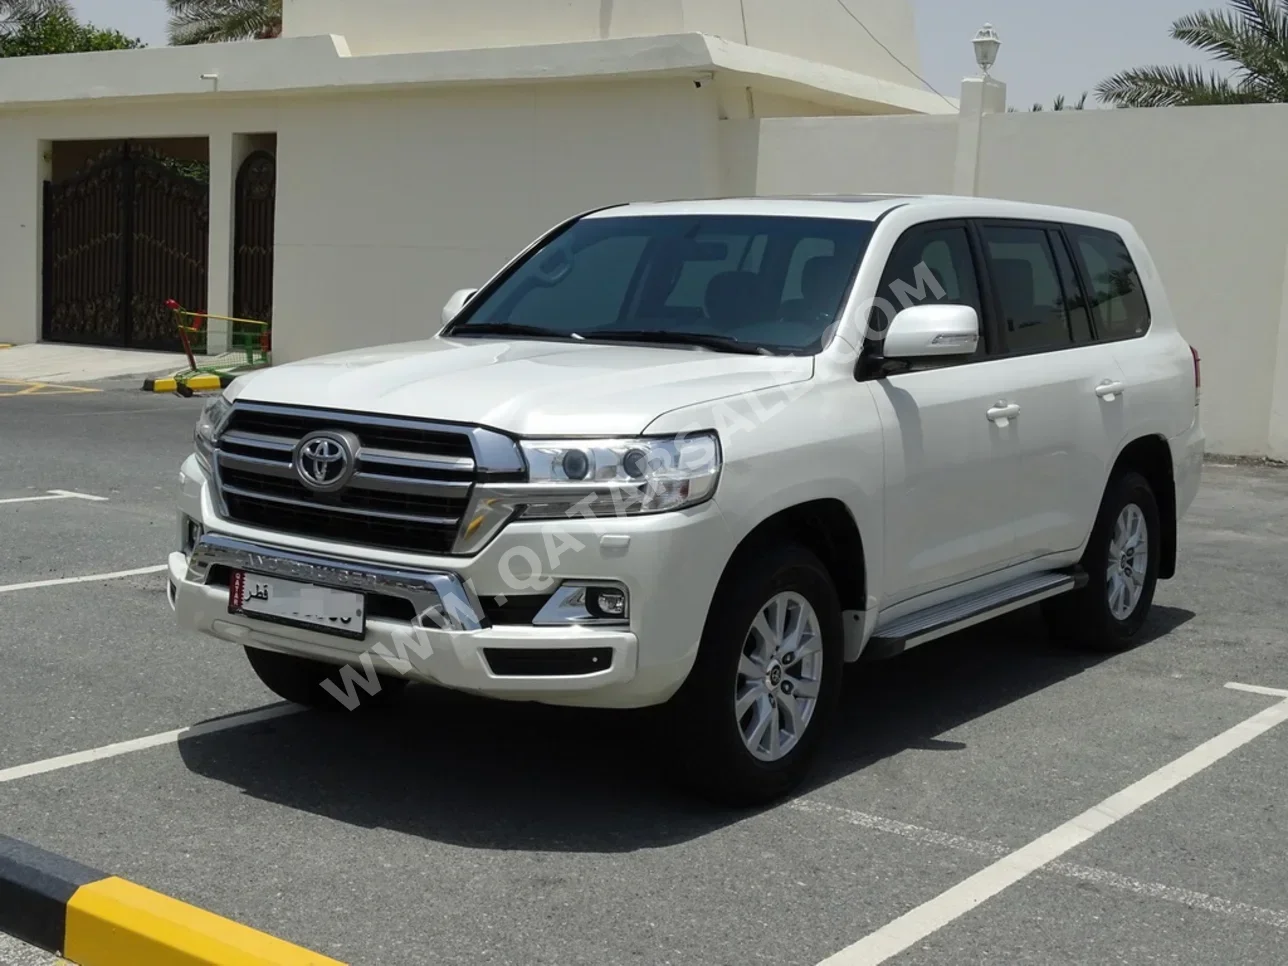  Toyota  Land Cruiser  GXR  2019  Automatic  199,000 Km  8 Cylinder  Four Wheel Drive (4WD)  SUV  White  With Warranty